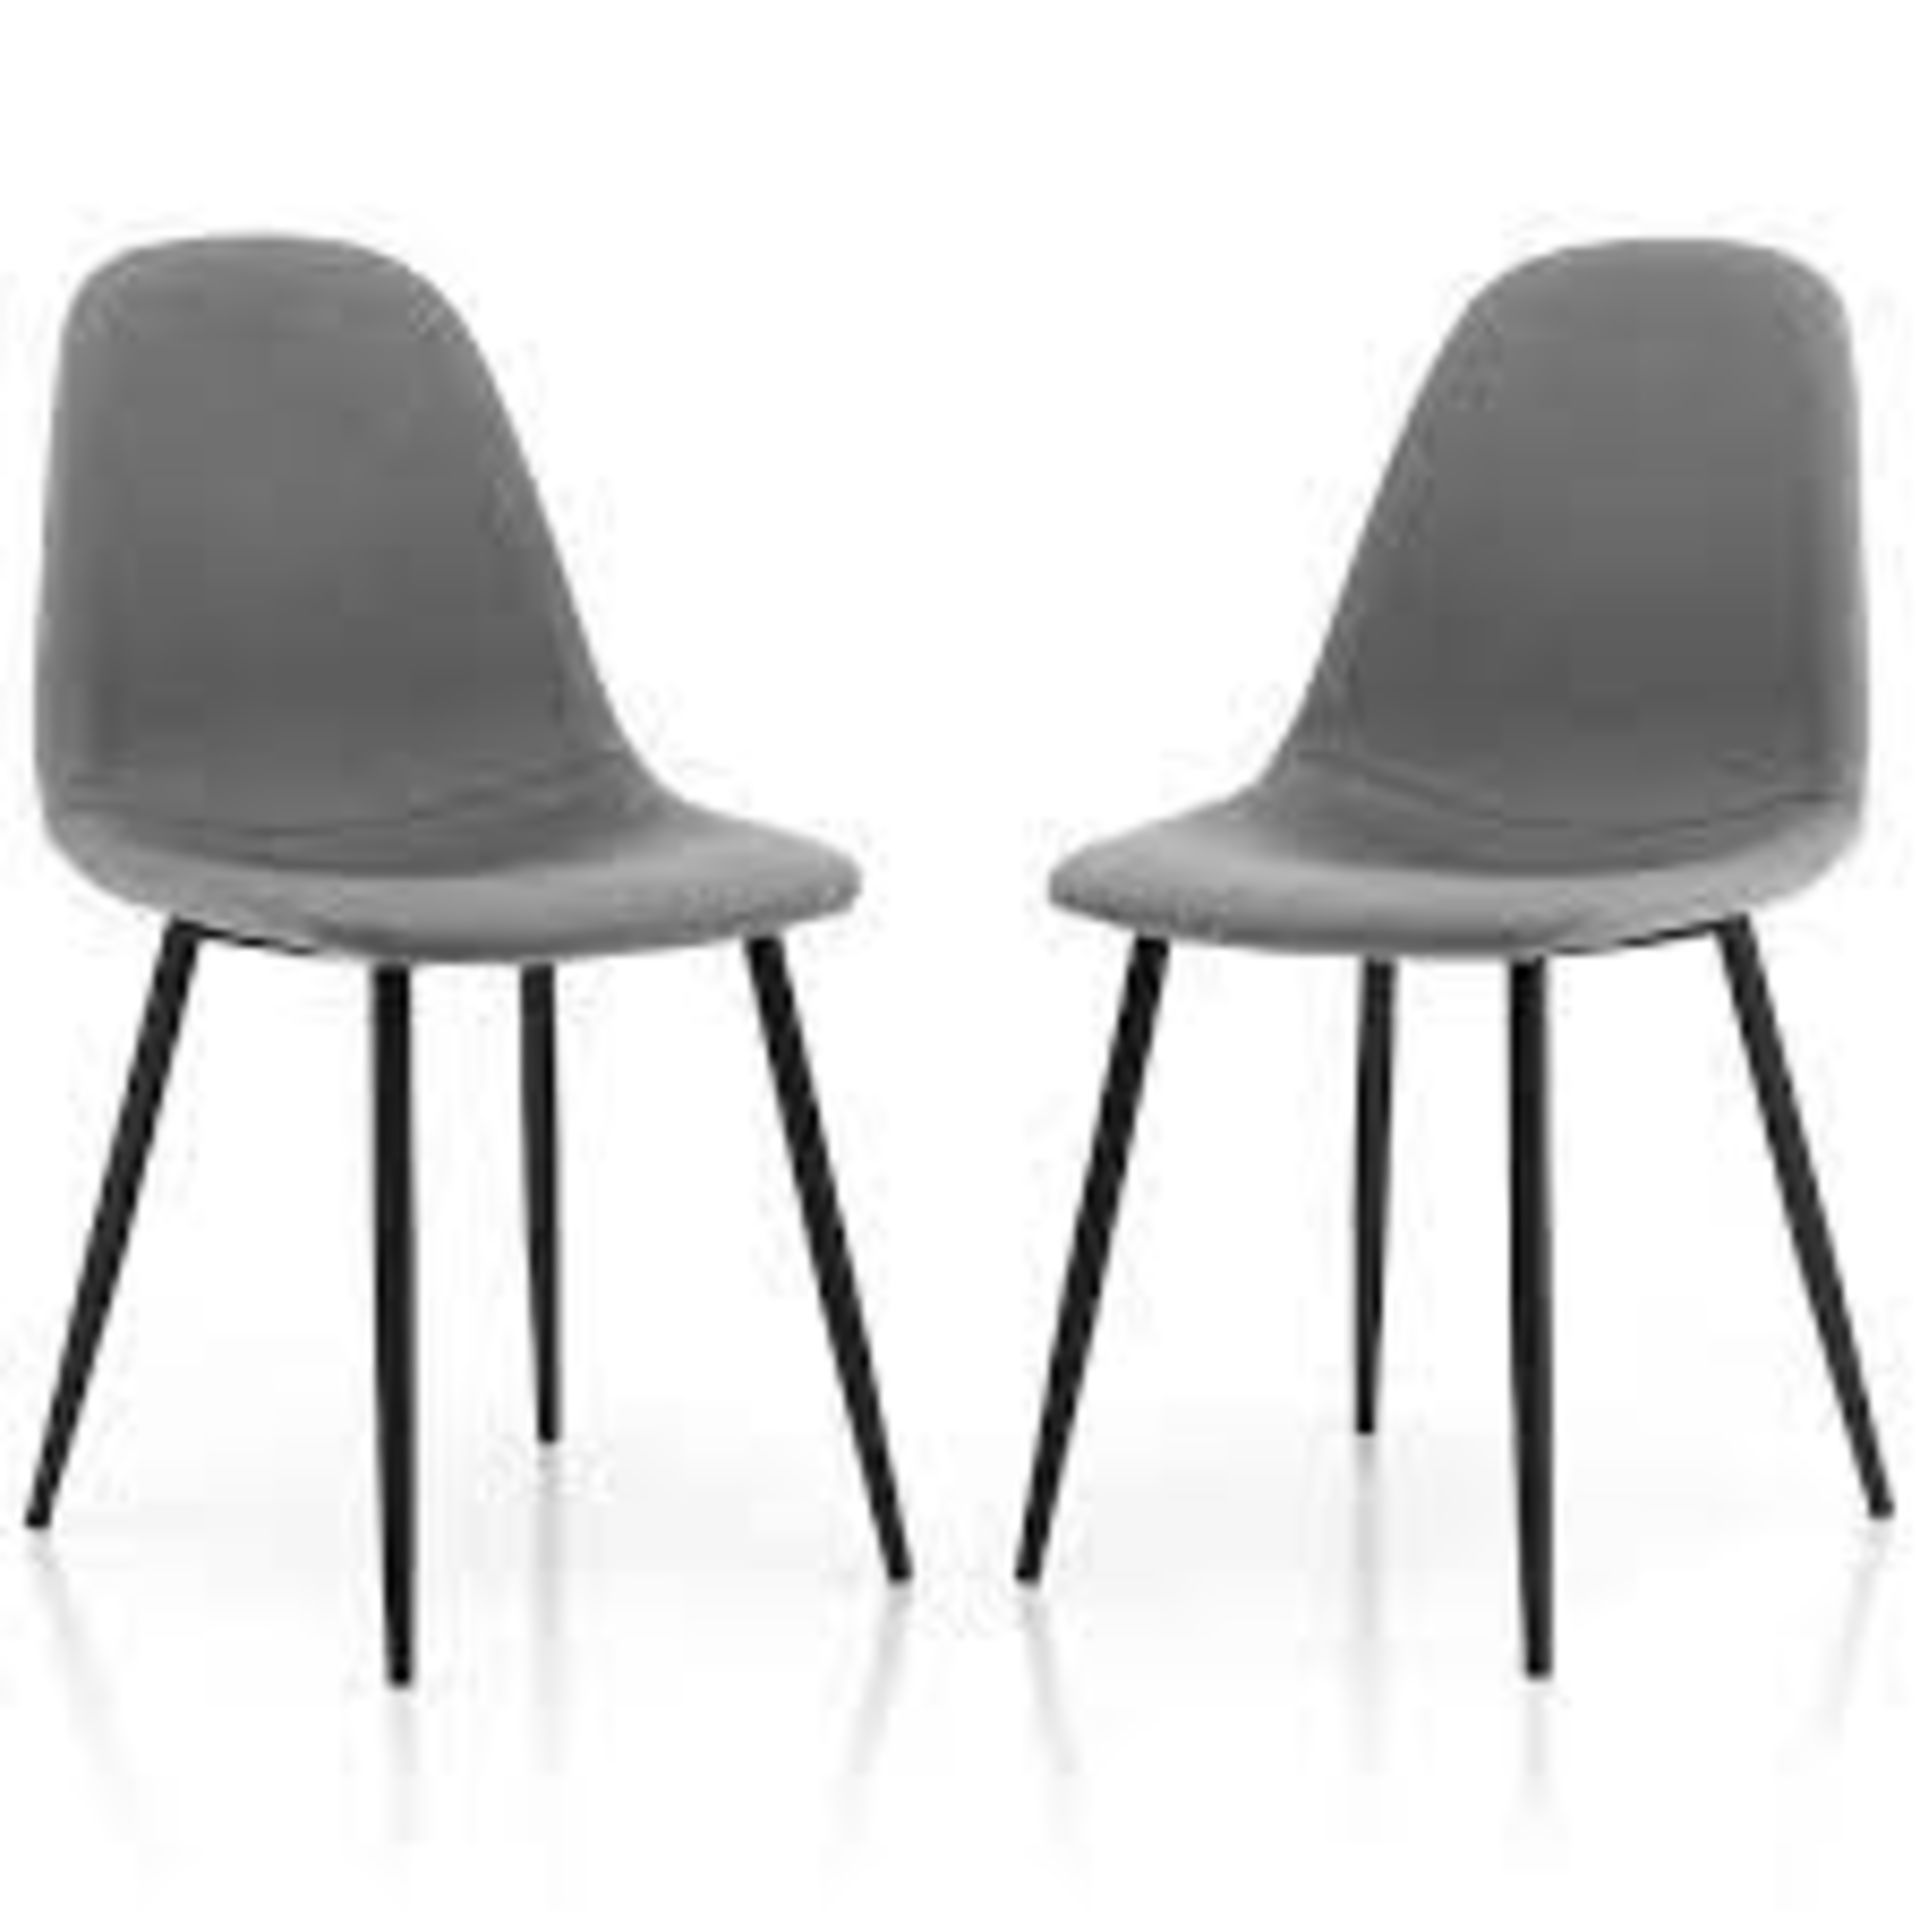 Upholstered Dining Chairs Set of 2 with Metal Legs-Grey - ER54